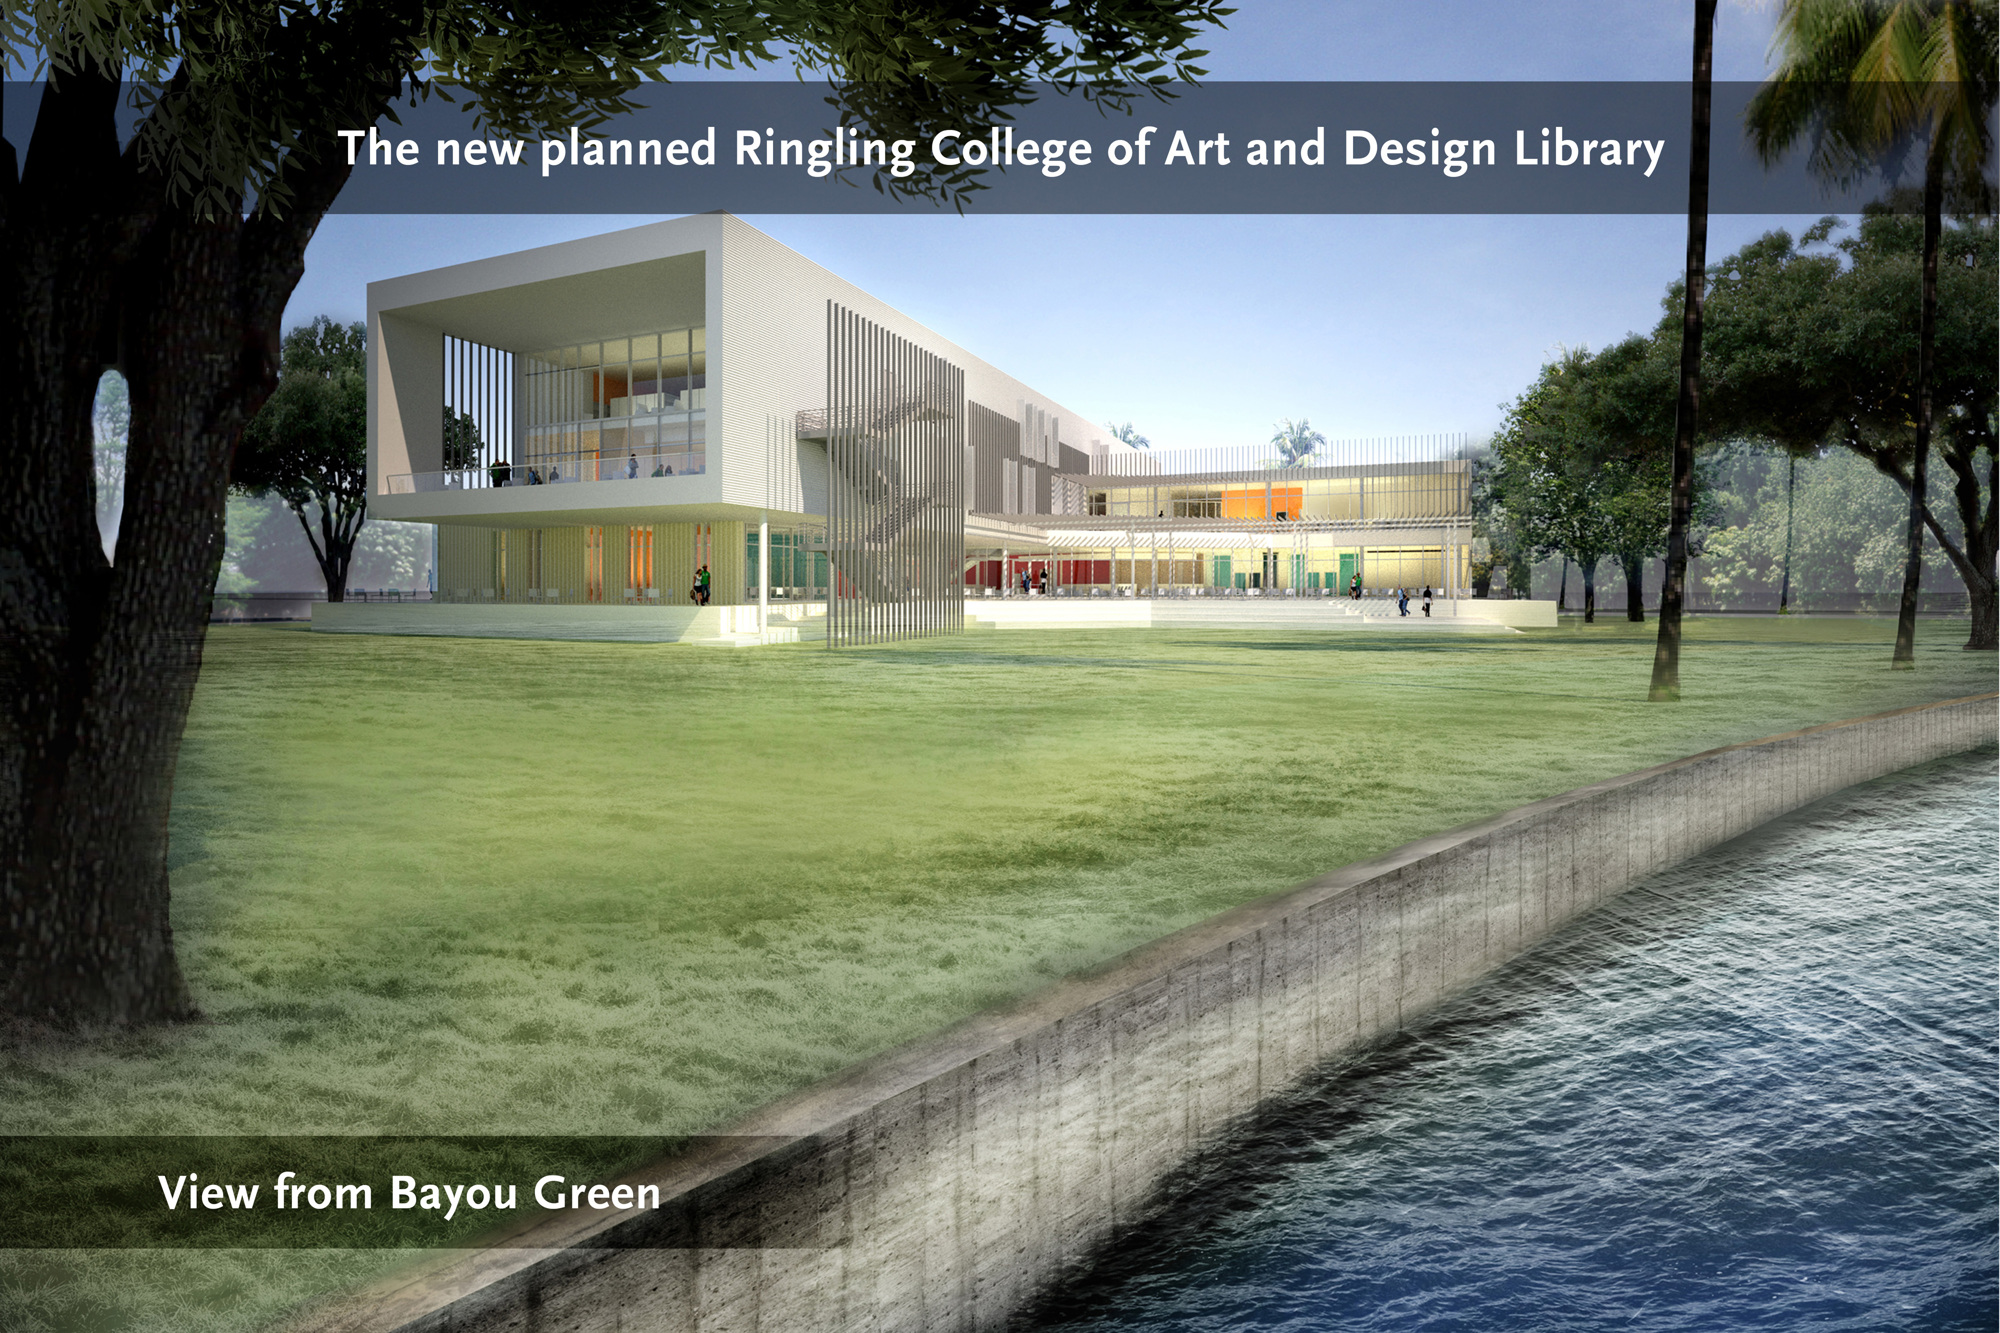 By raising the $16 million goal a year earlier then projected, the new library is now schedule to open a year earlier in August 2016.